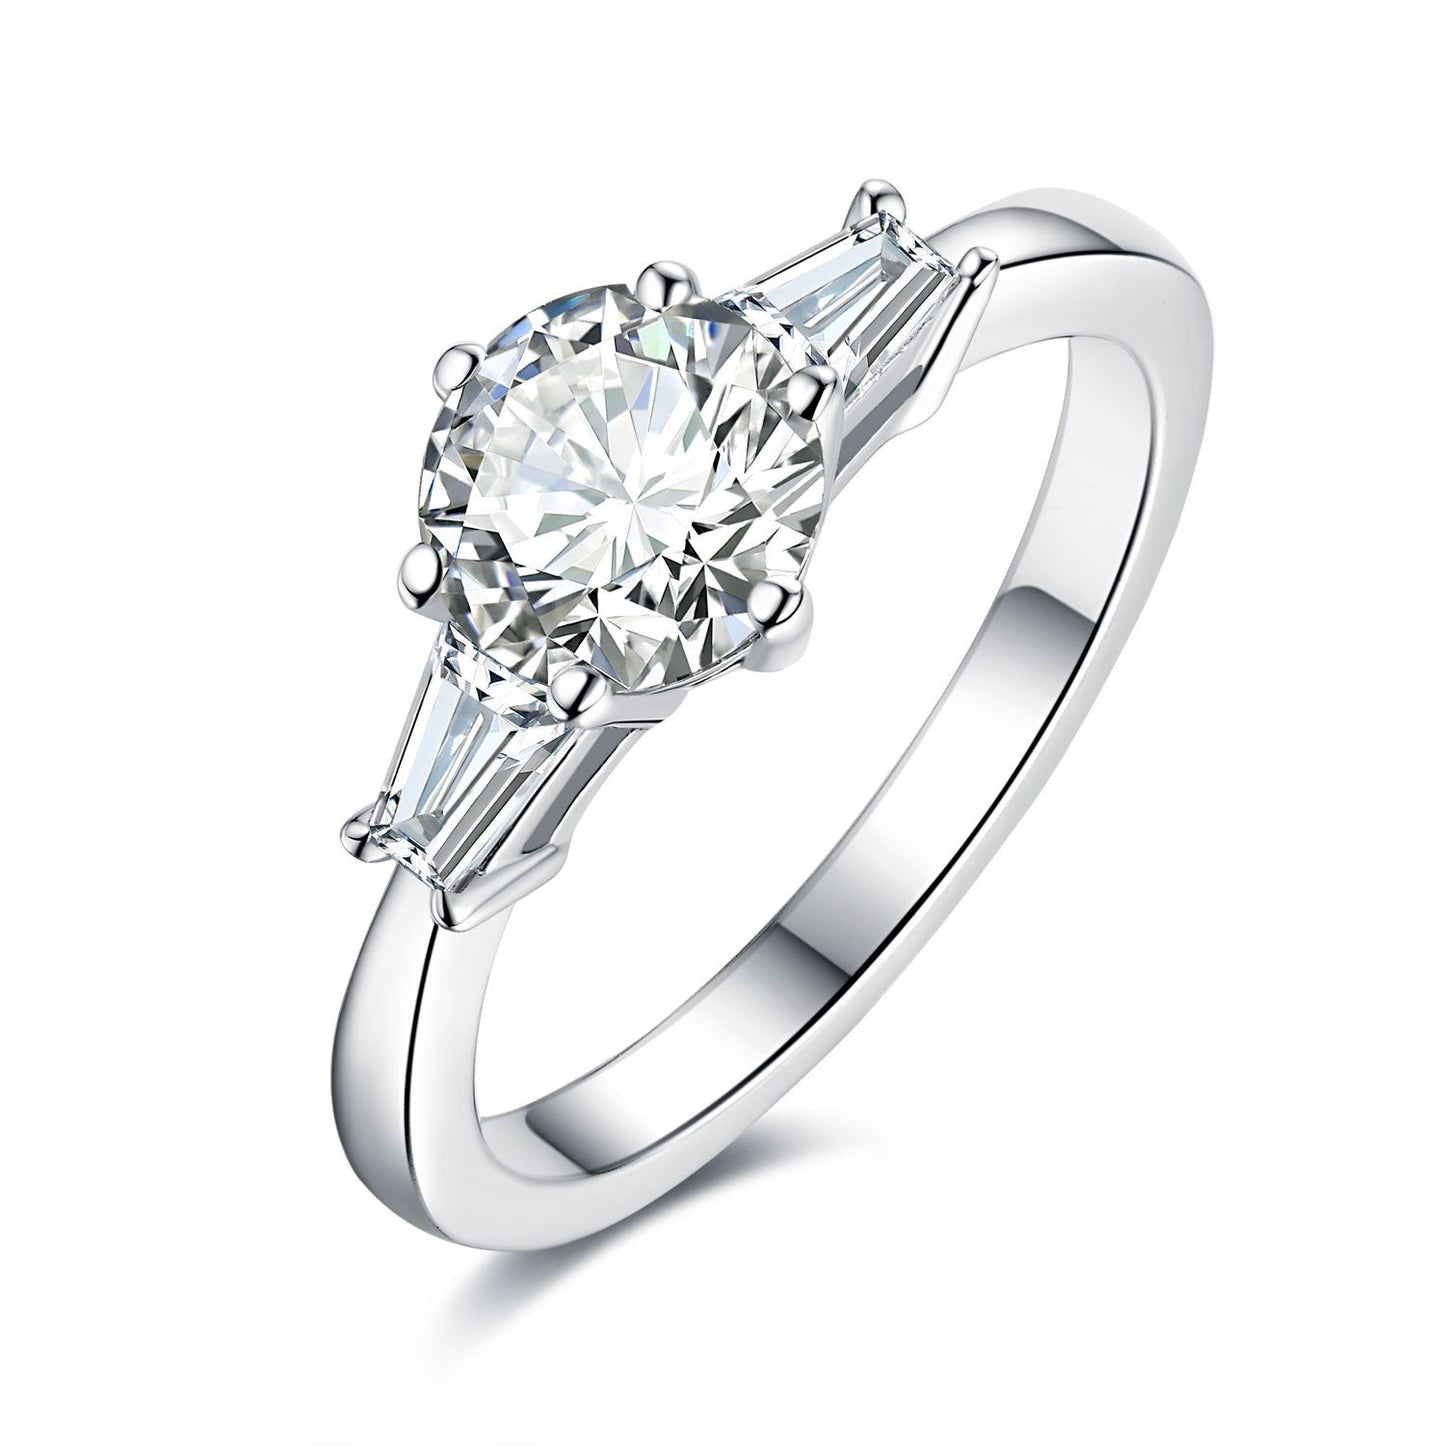 Classic Left and Right Fengyuan, Ladder Square Round Moissanite Rings, Recommended Wedding Gifts